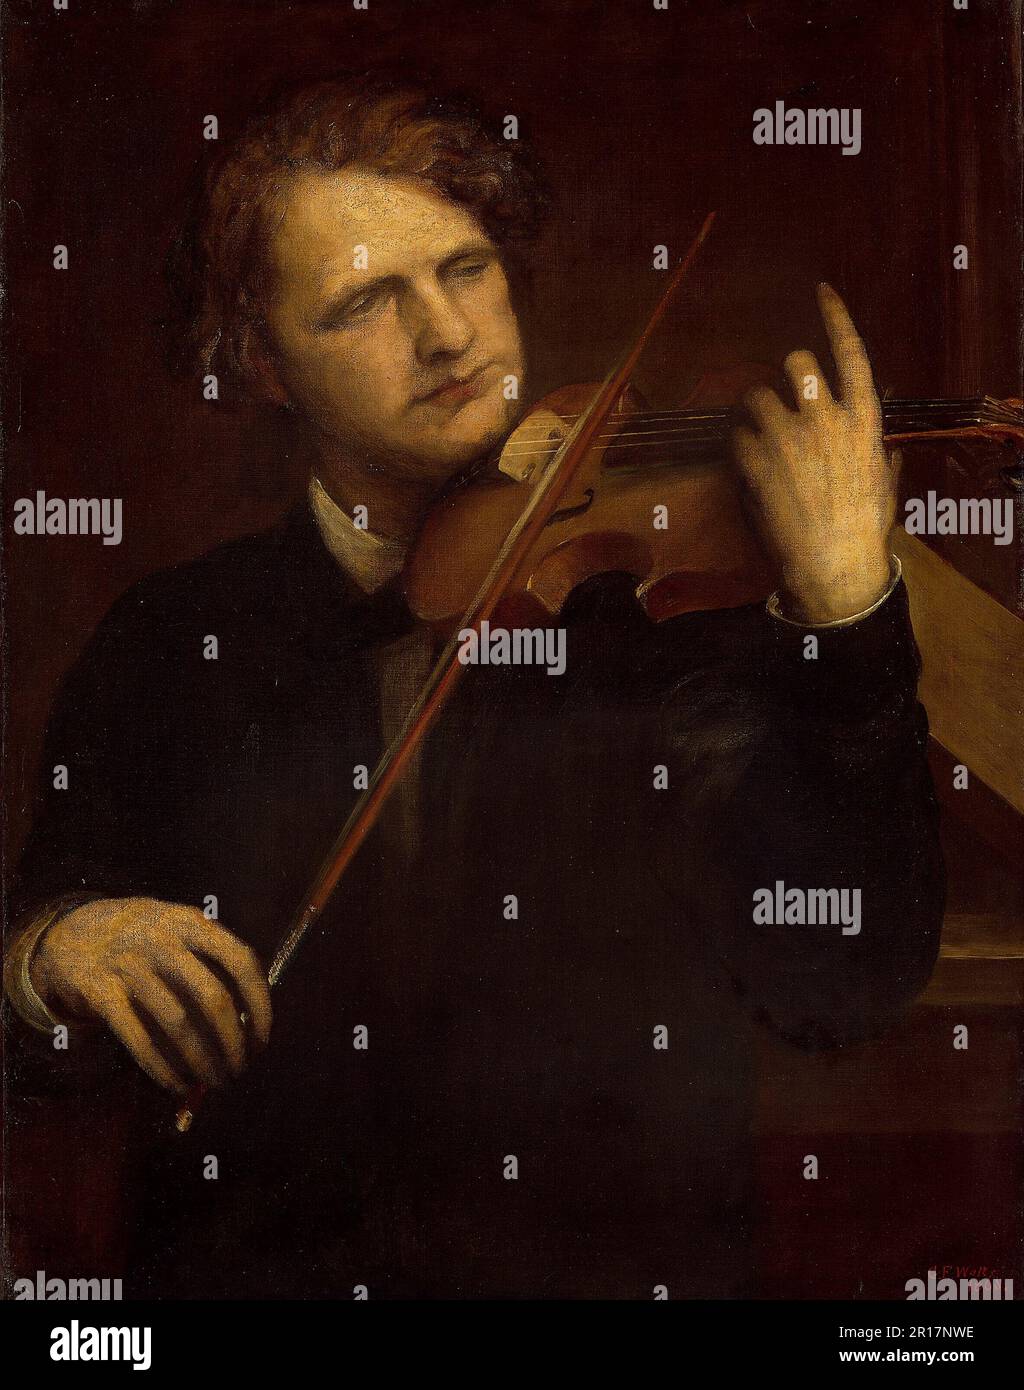 A Lamtright Study: Herr Joachim Date: 1868 artiste: George Frederick Watts Anglais, 1817-1904 Banque D'Images